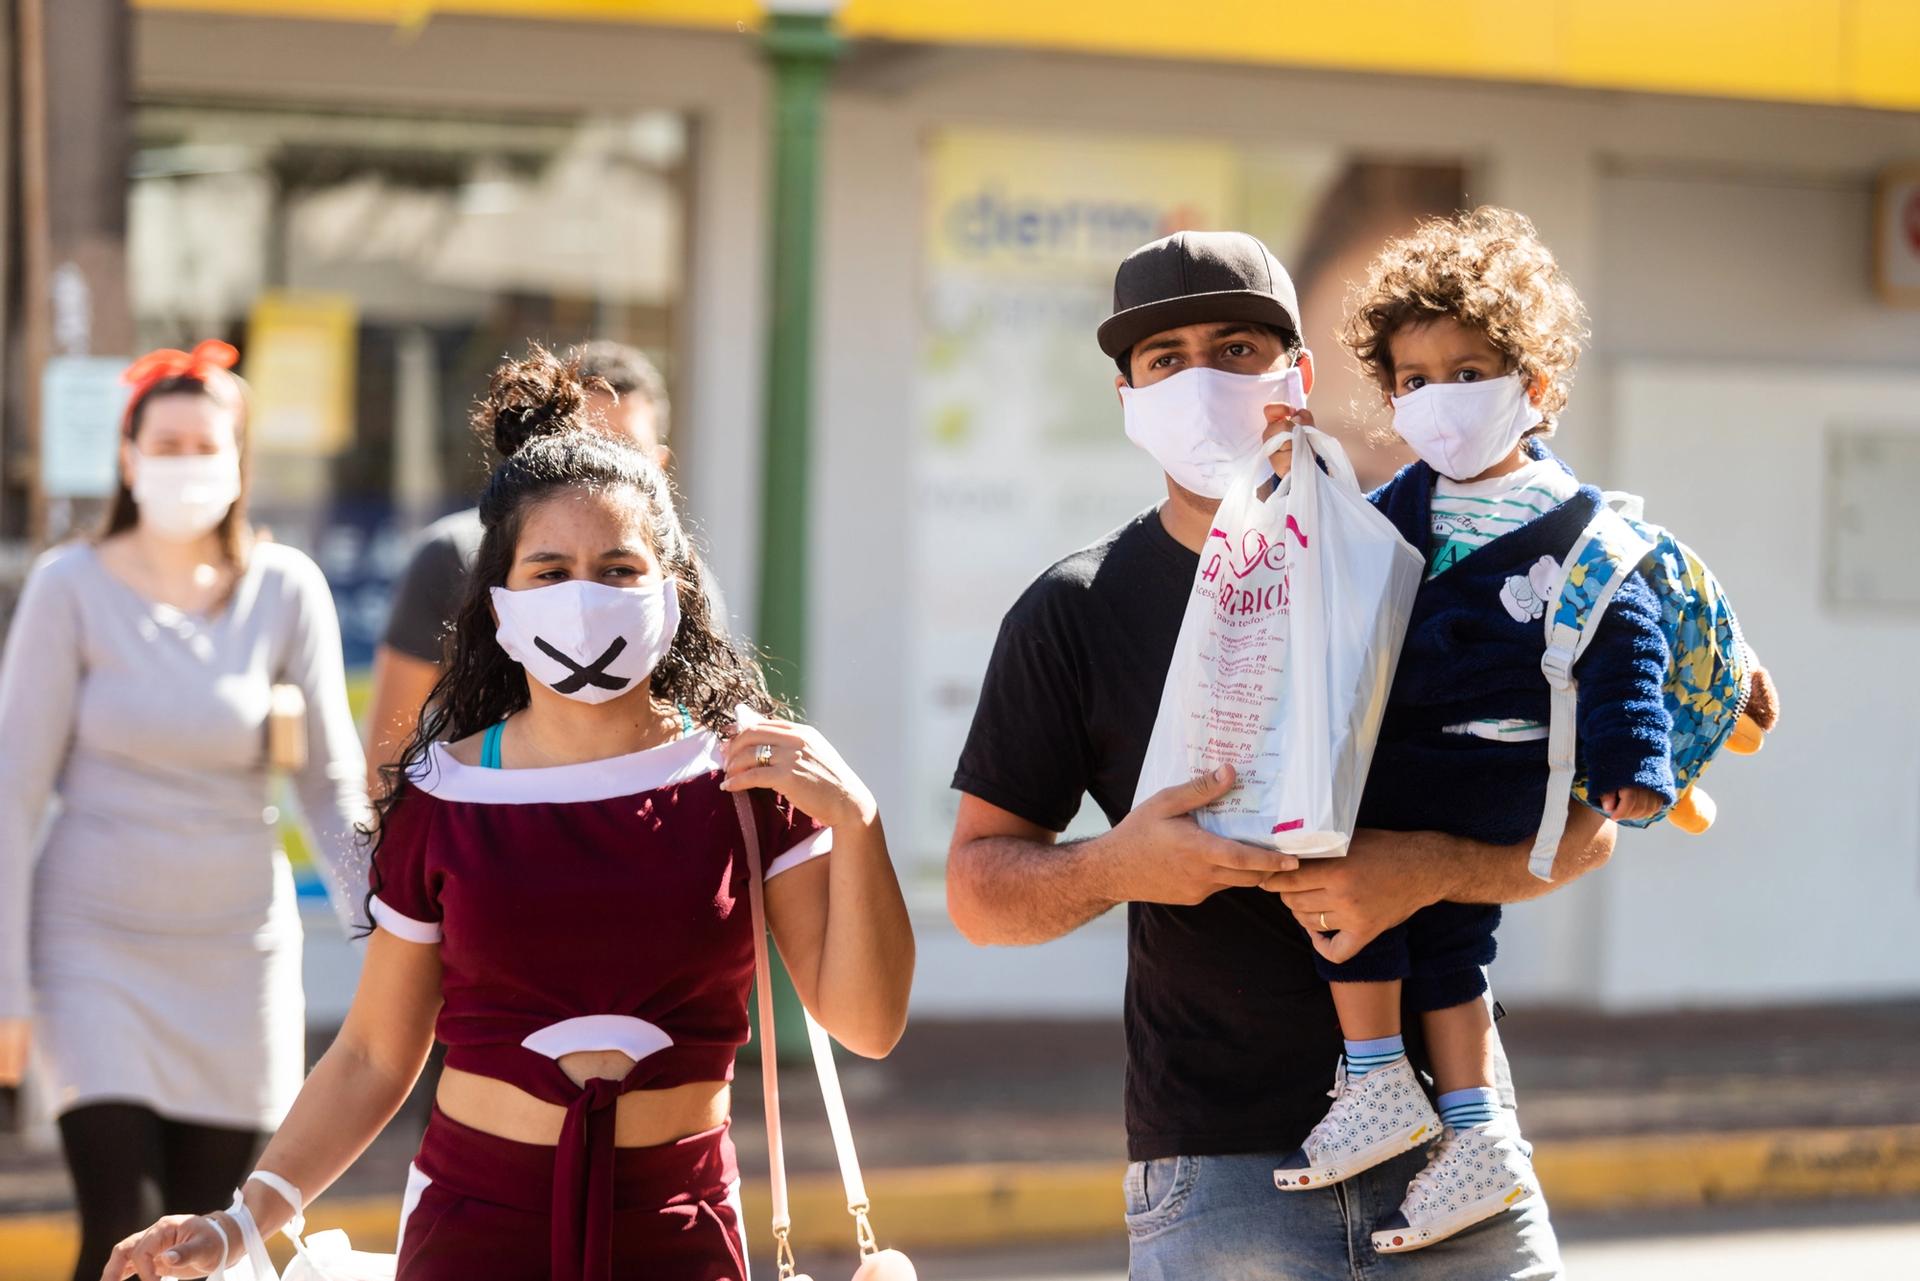 A woman, and a man carrying a young child, walking down the street towards the camera. All three are wearing masks over mouth and nose.